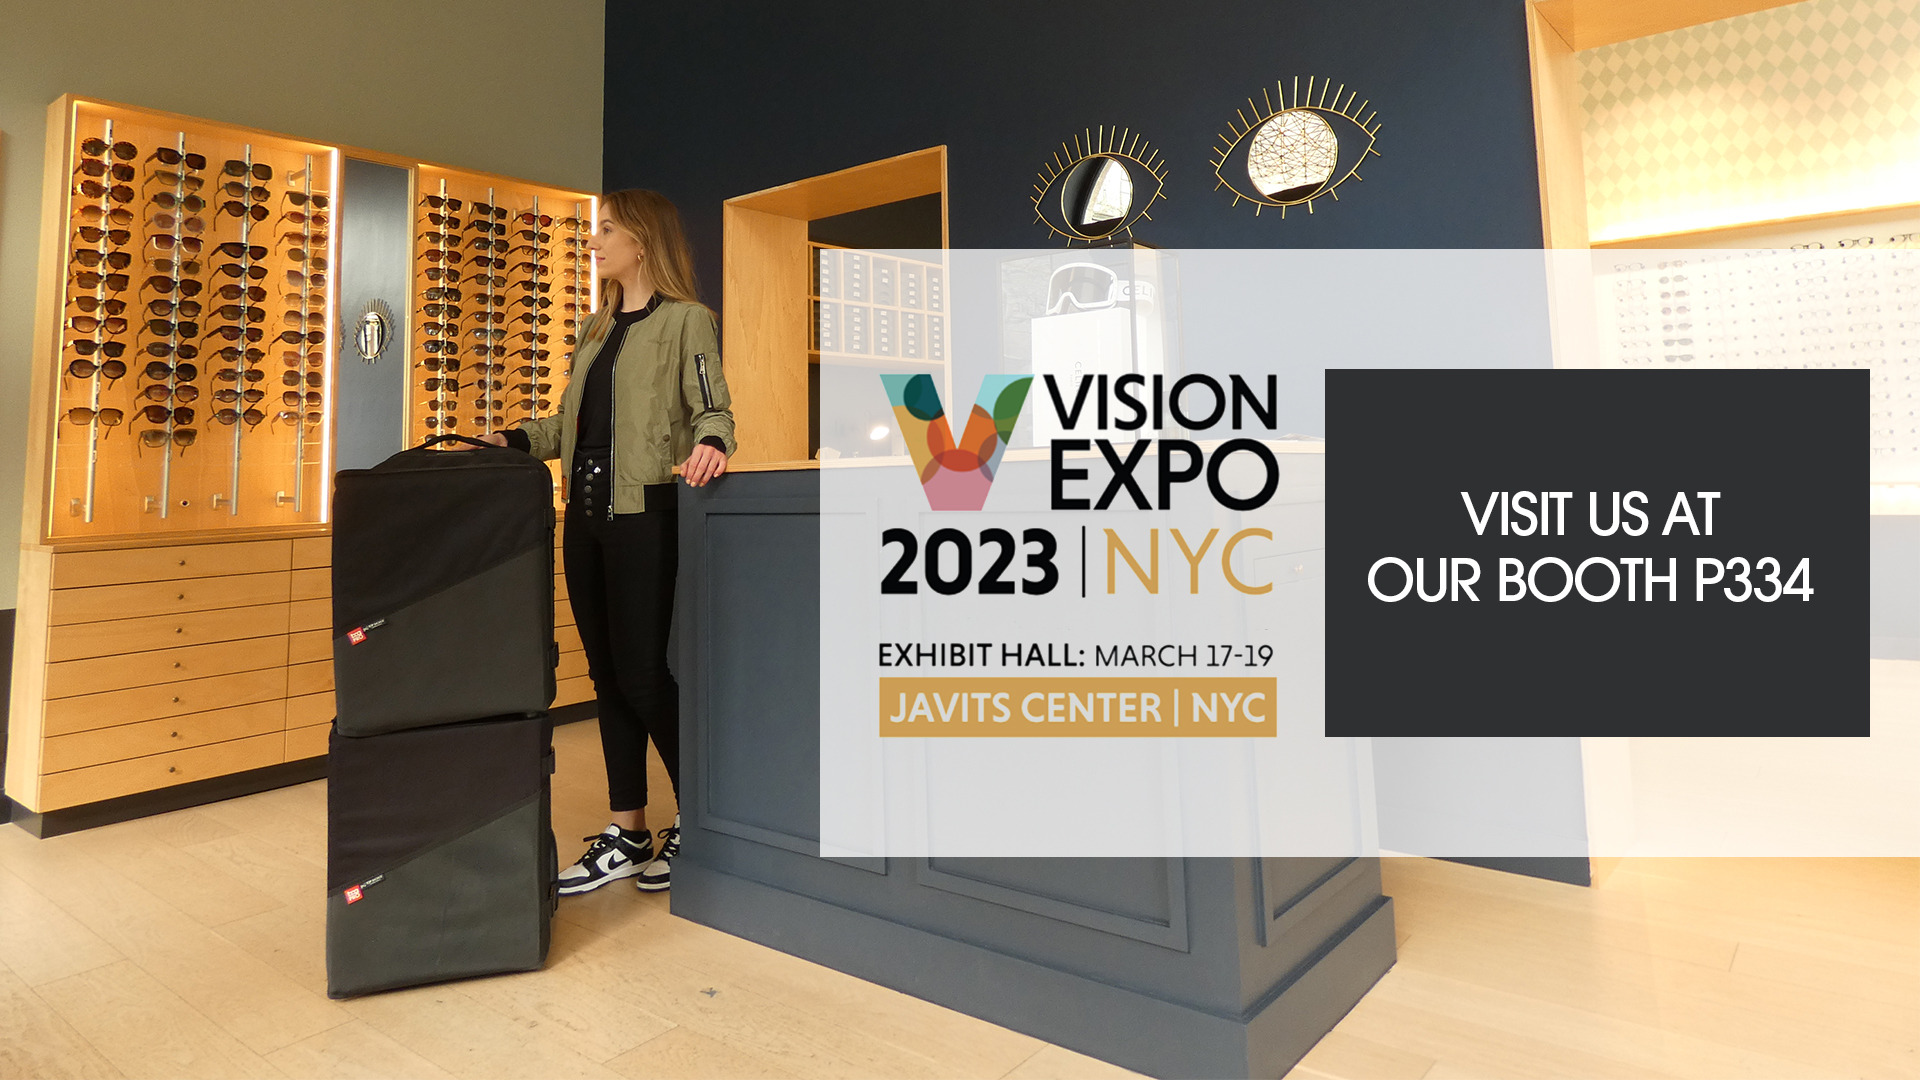 NYC VISION EXPO 2023: Bag PRO’s team will attend!